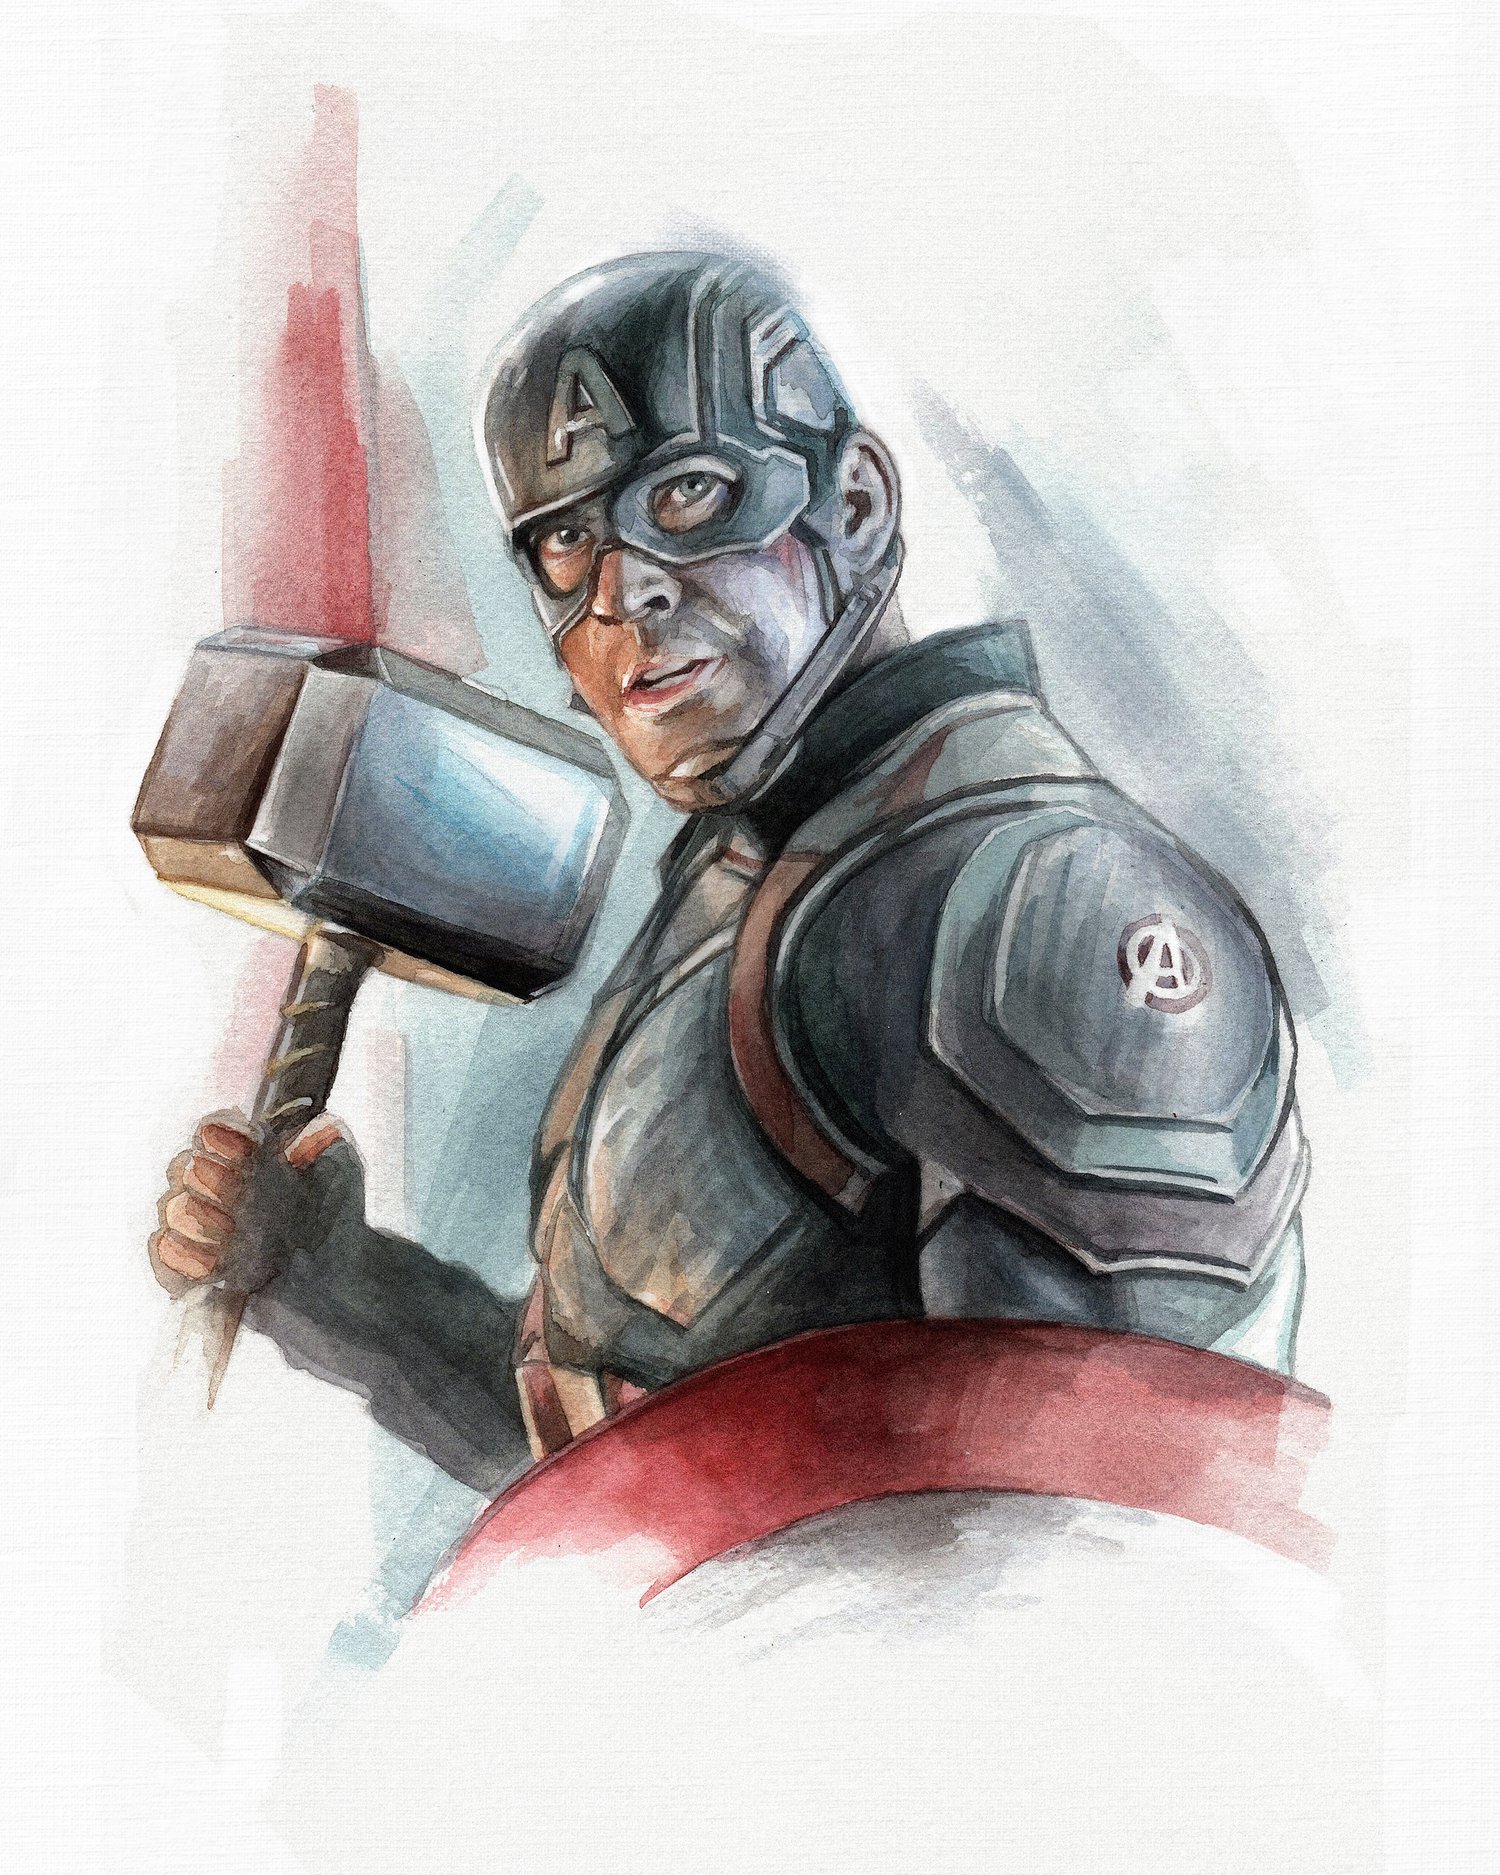 Image of Captain America with Mjolnir